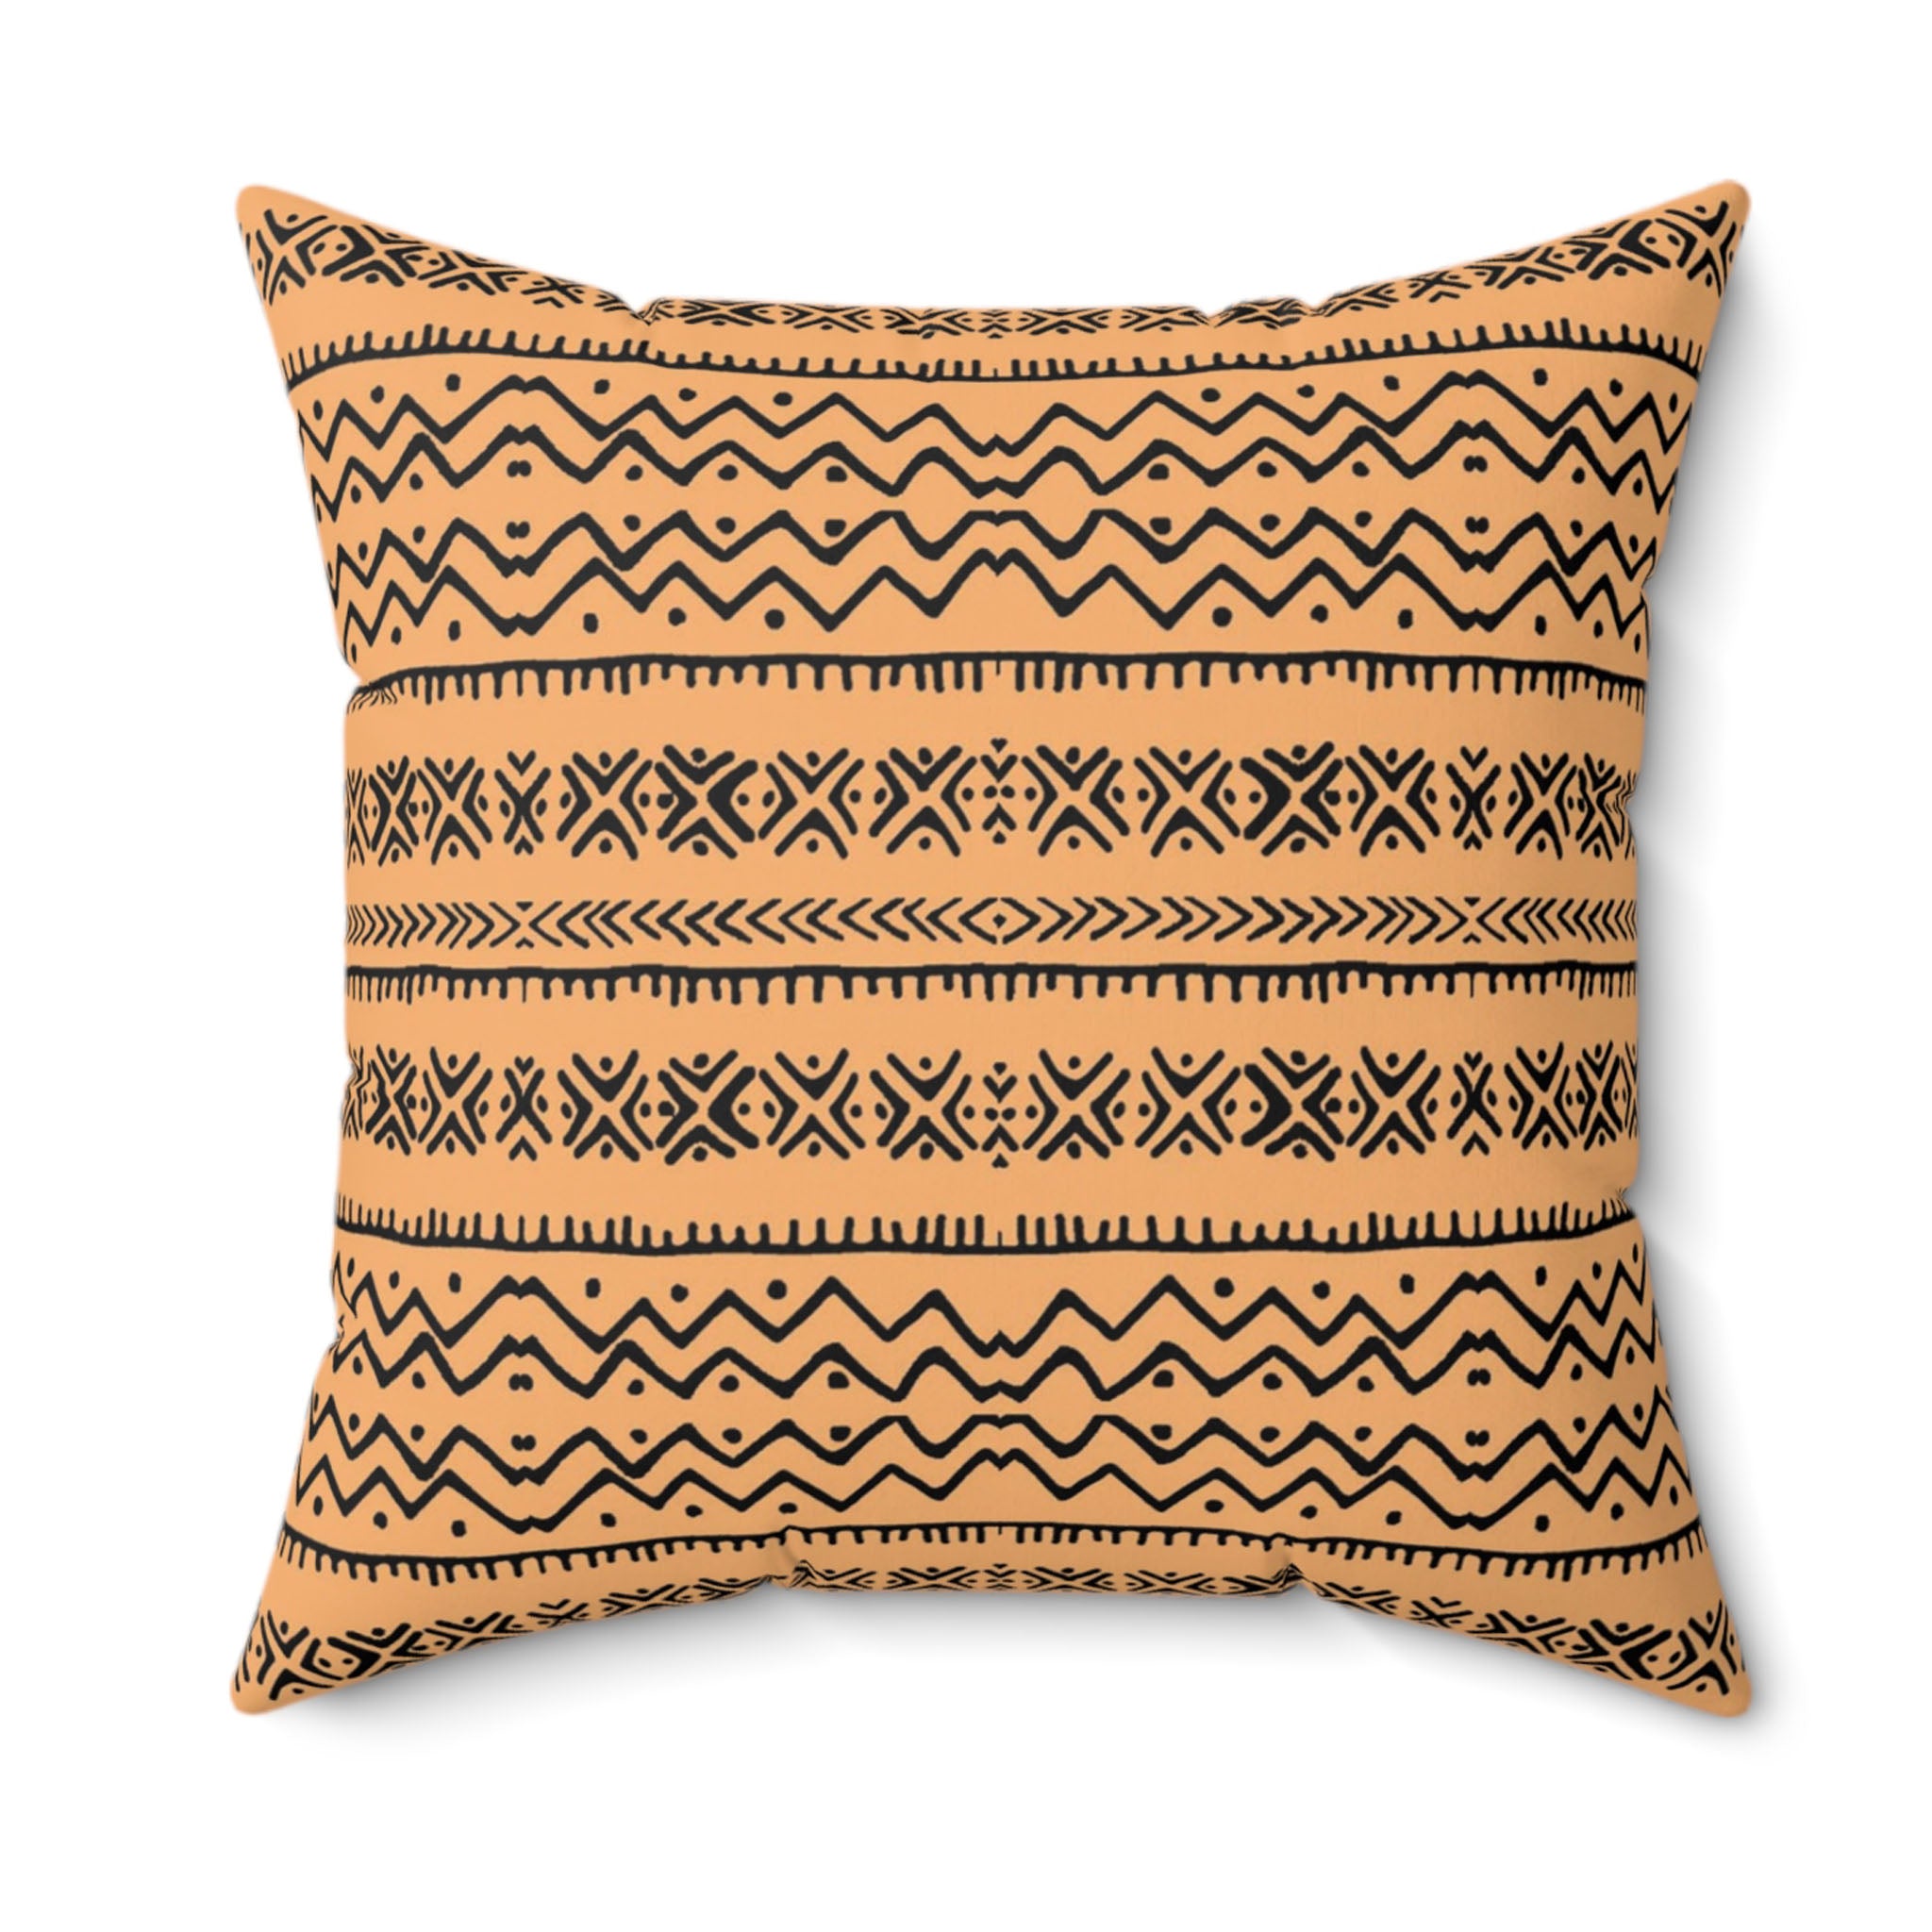 2-Set Mud cloth African Cushion: Pillow Cases & Throw Covers